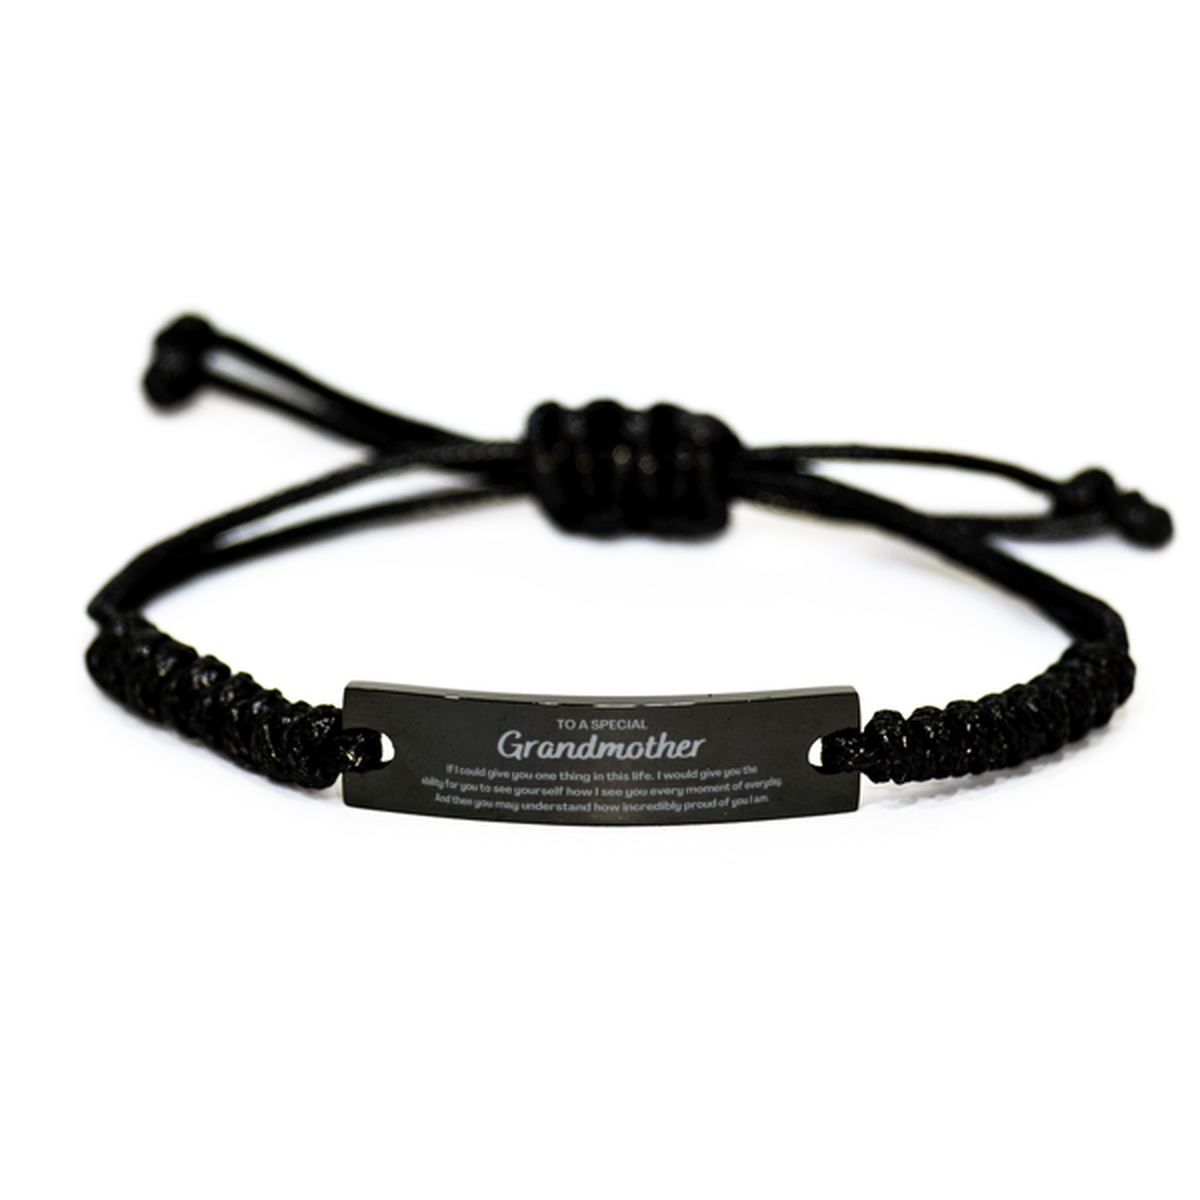 To My Grandmother Black Rope Bracelet, Gifts For Grandmother Engraved, Inspirational Gifts for Christmas Birthday, Epic Gifts for Grandmother To A Special Grandmother how incredibly proud of you I am